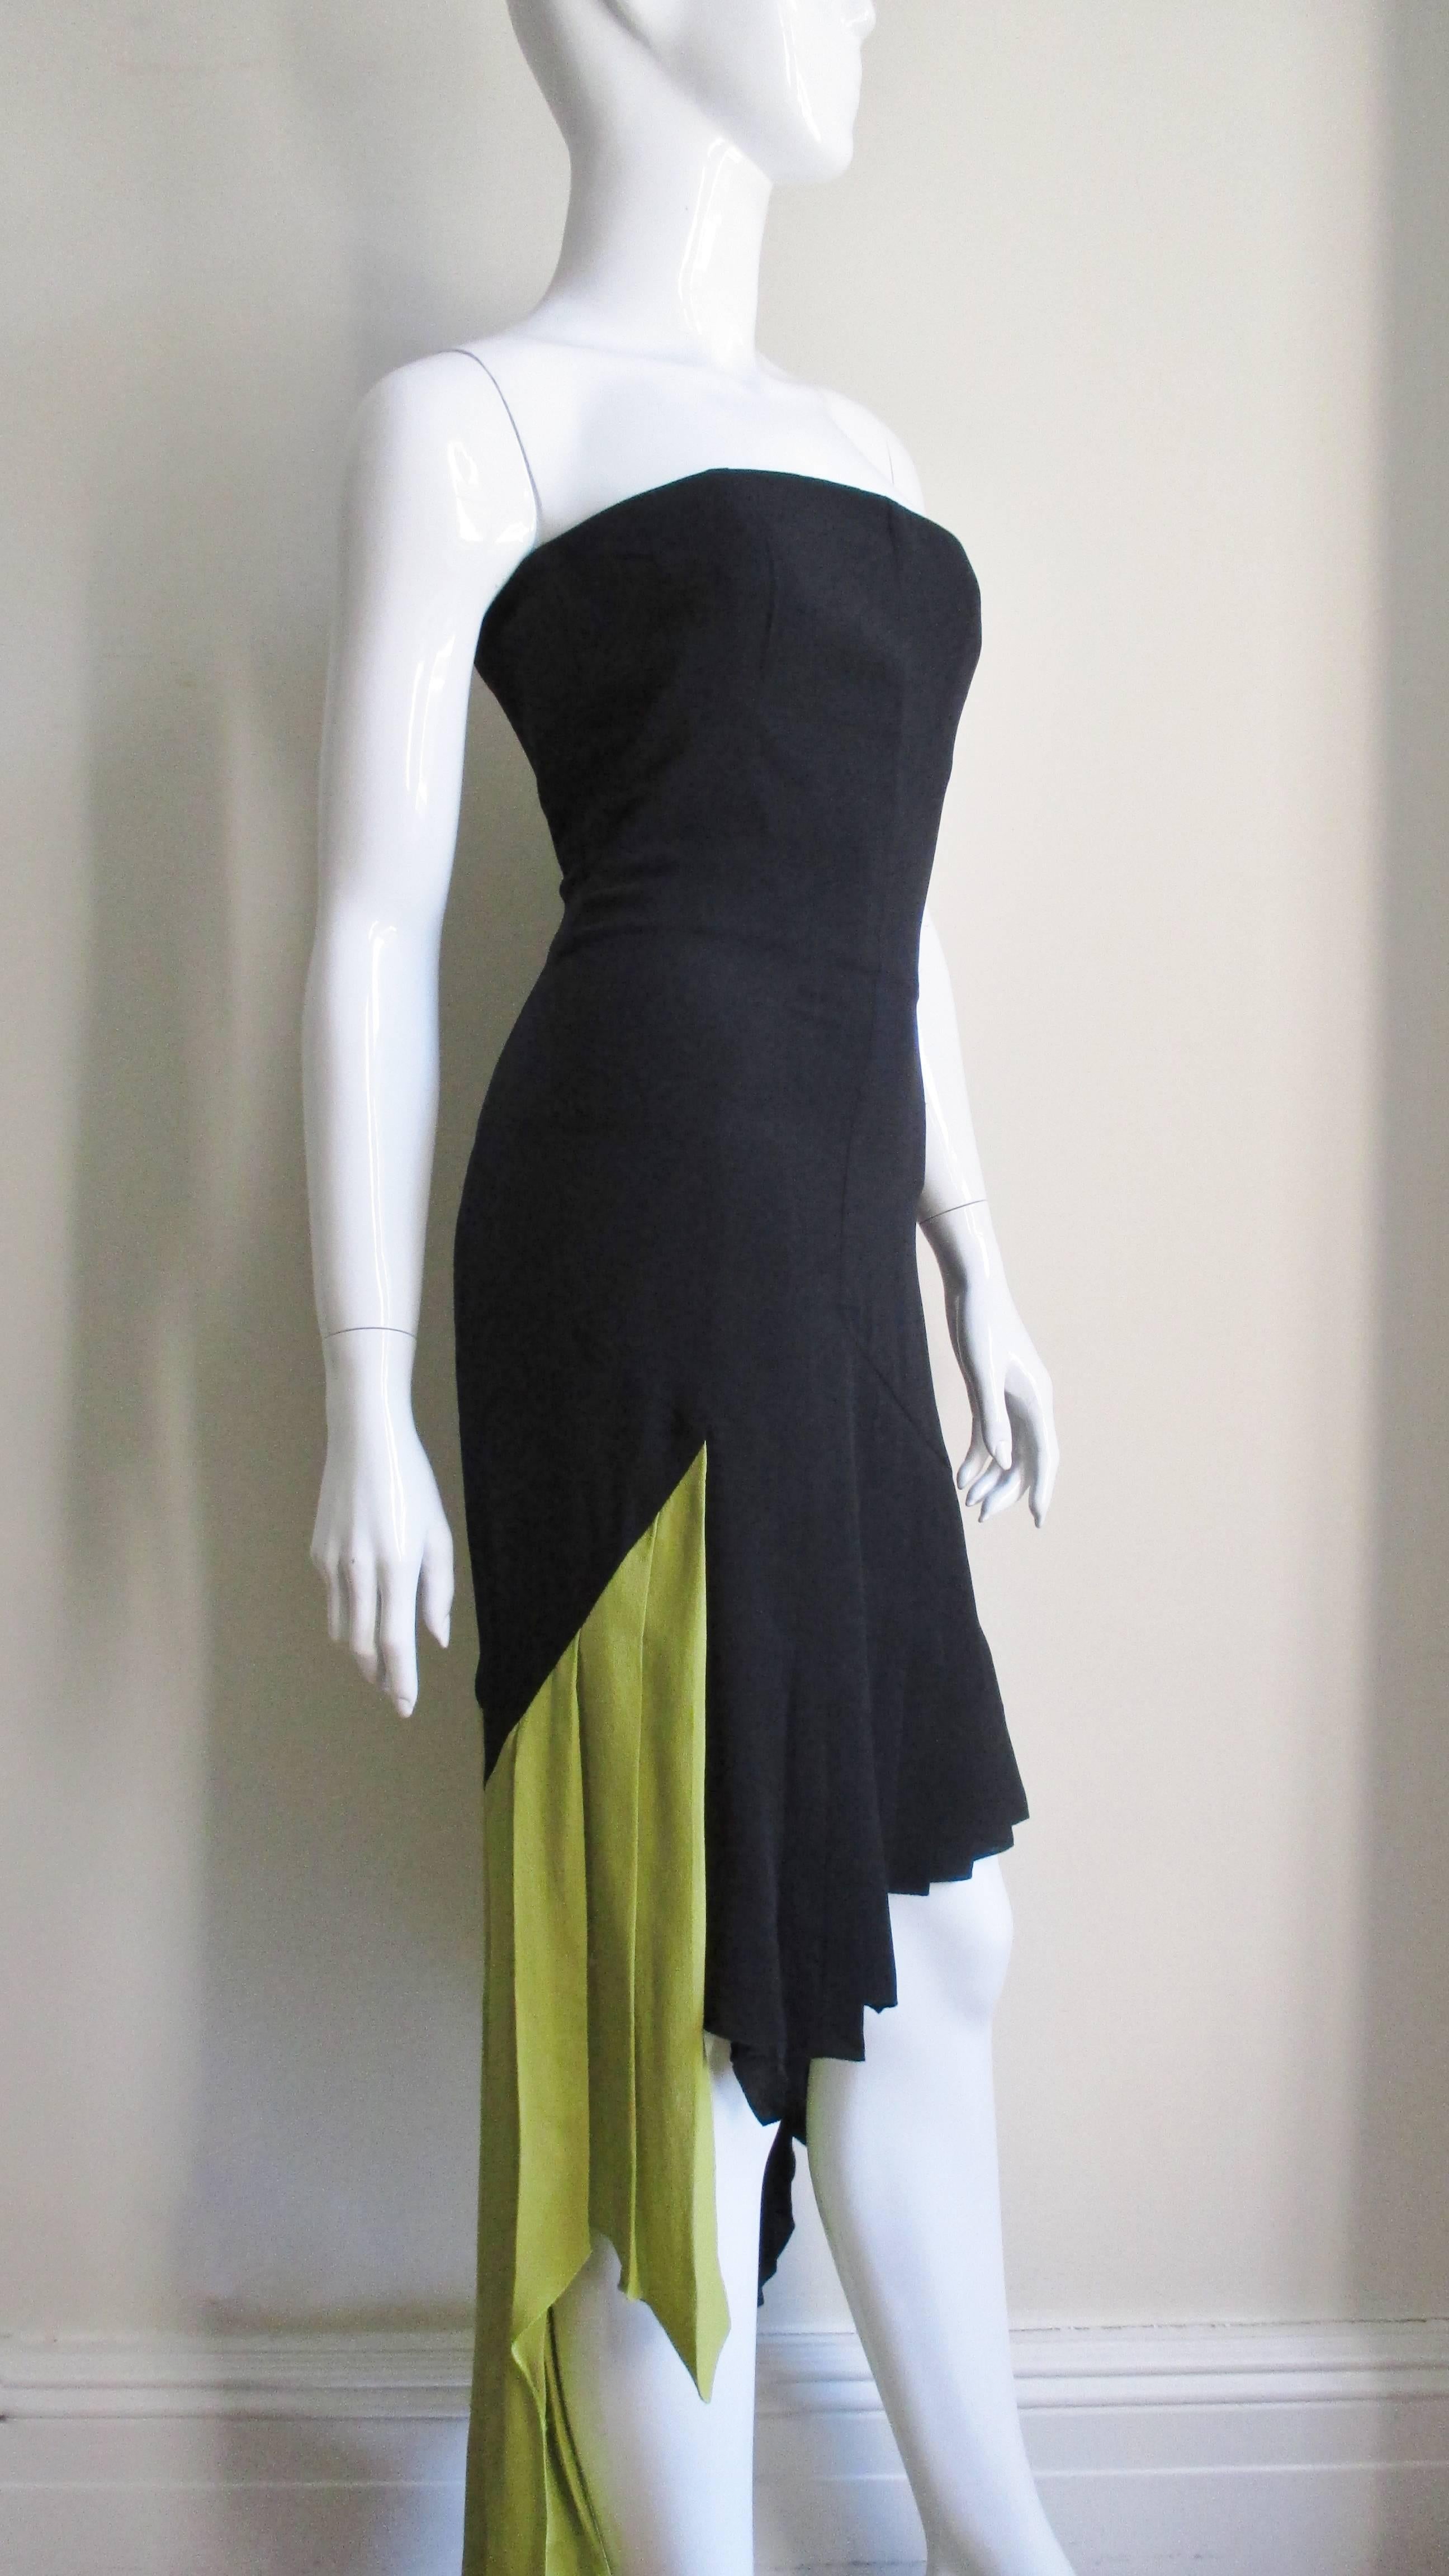 Women's 1990s Gianni Versace Color Block Bustier Dress with Lime Train